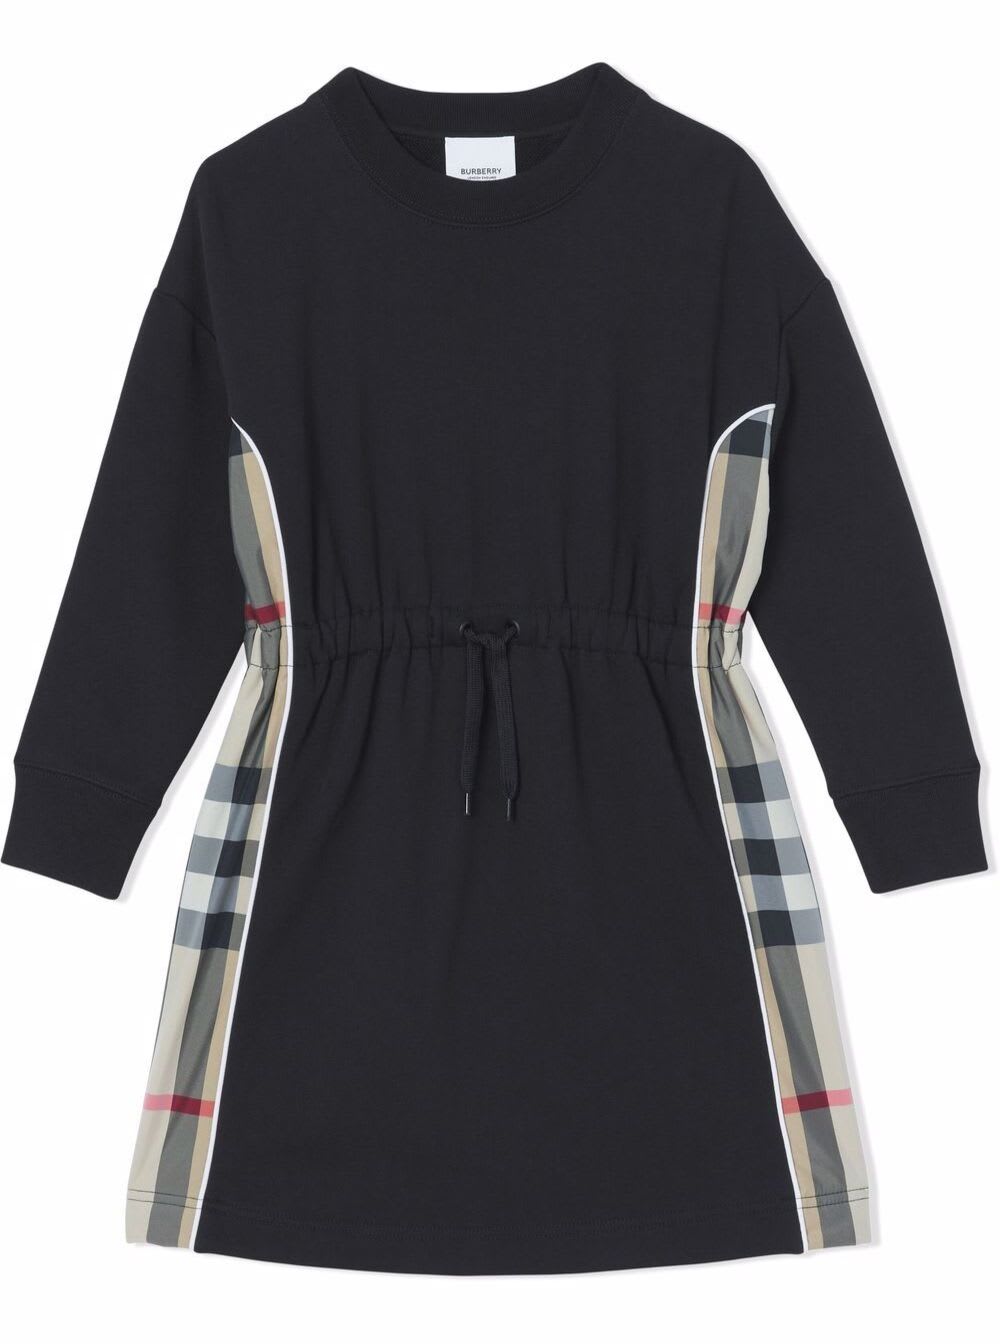 Burberry Black Cotton Dress With Vintage Check Inserts